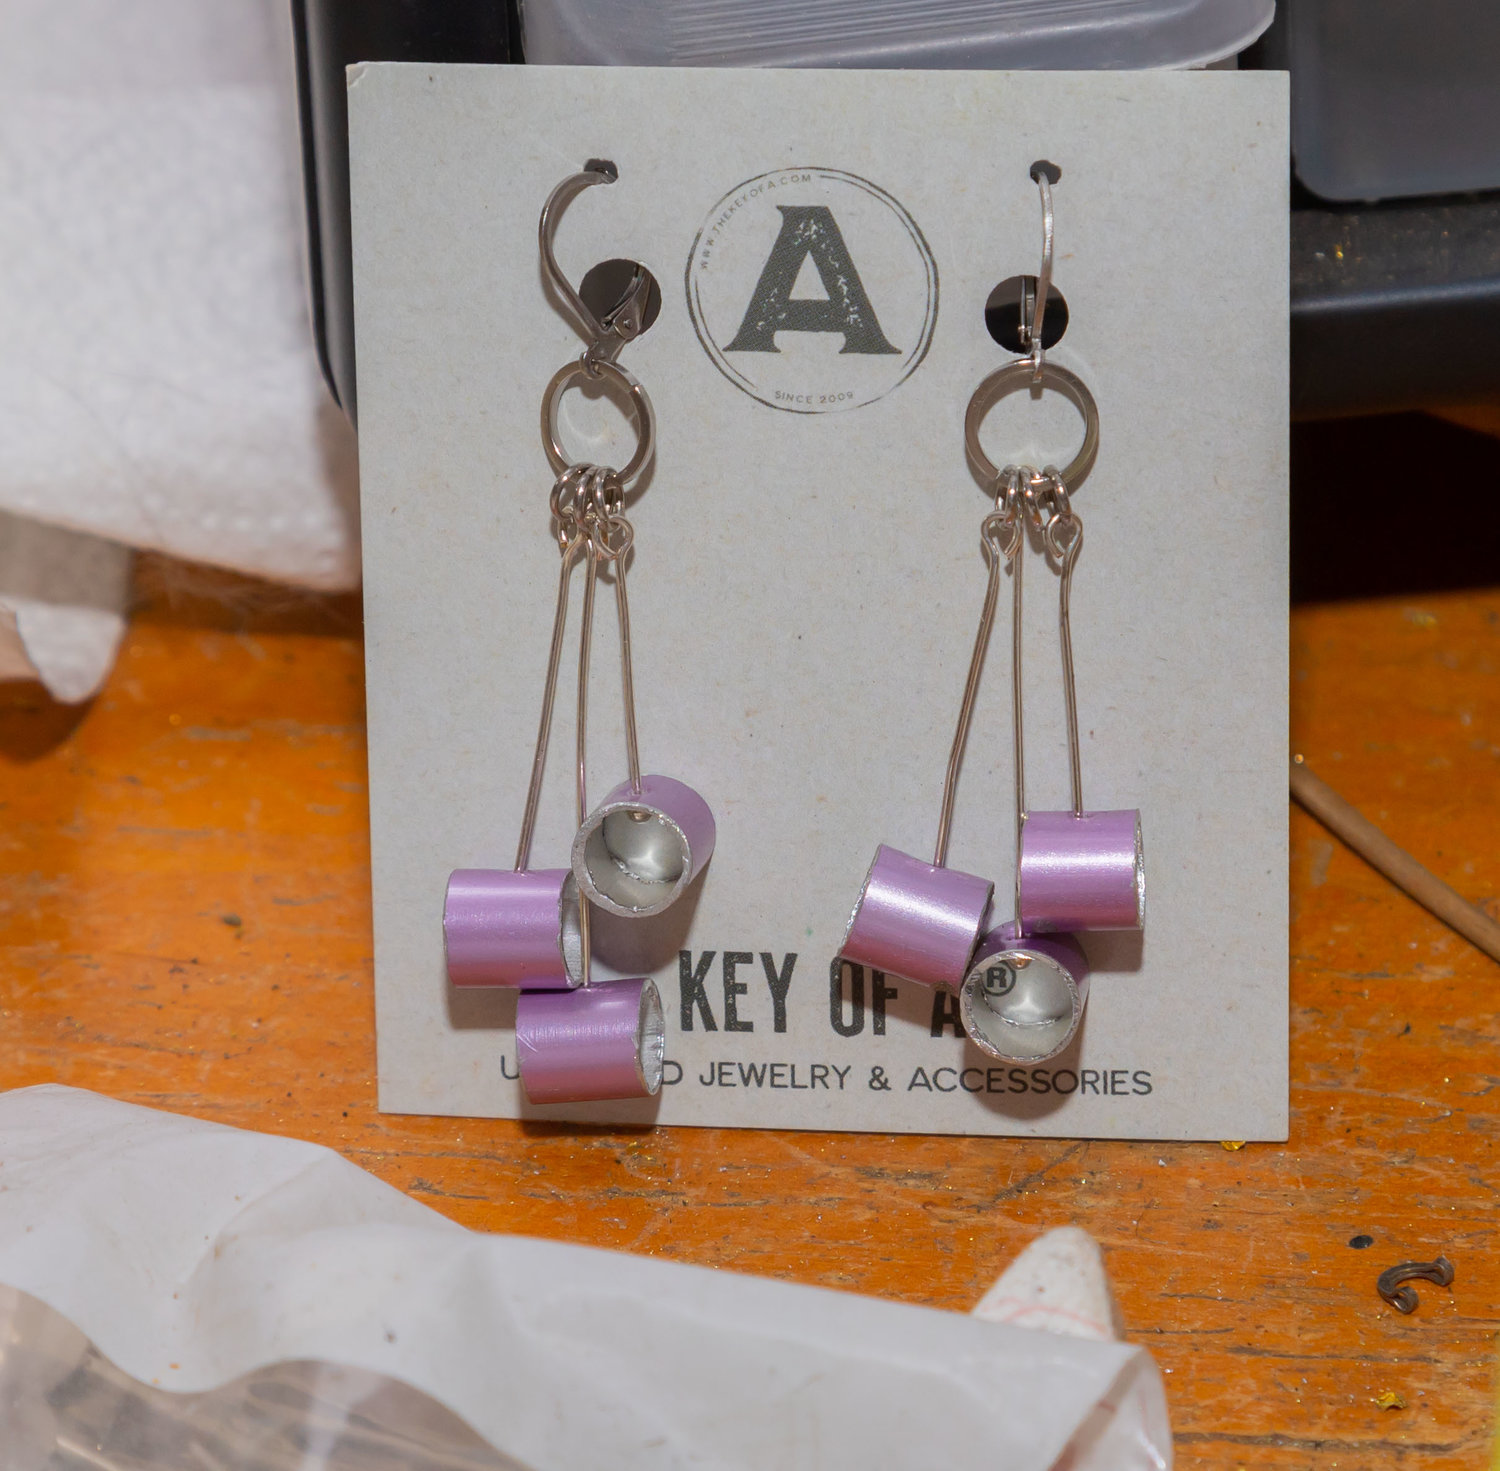 Pieces of knitting needles become earrings at Key of A, a jewelry company that upcycles discarded items.